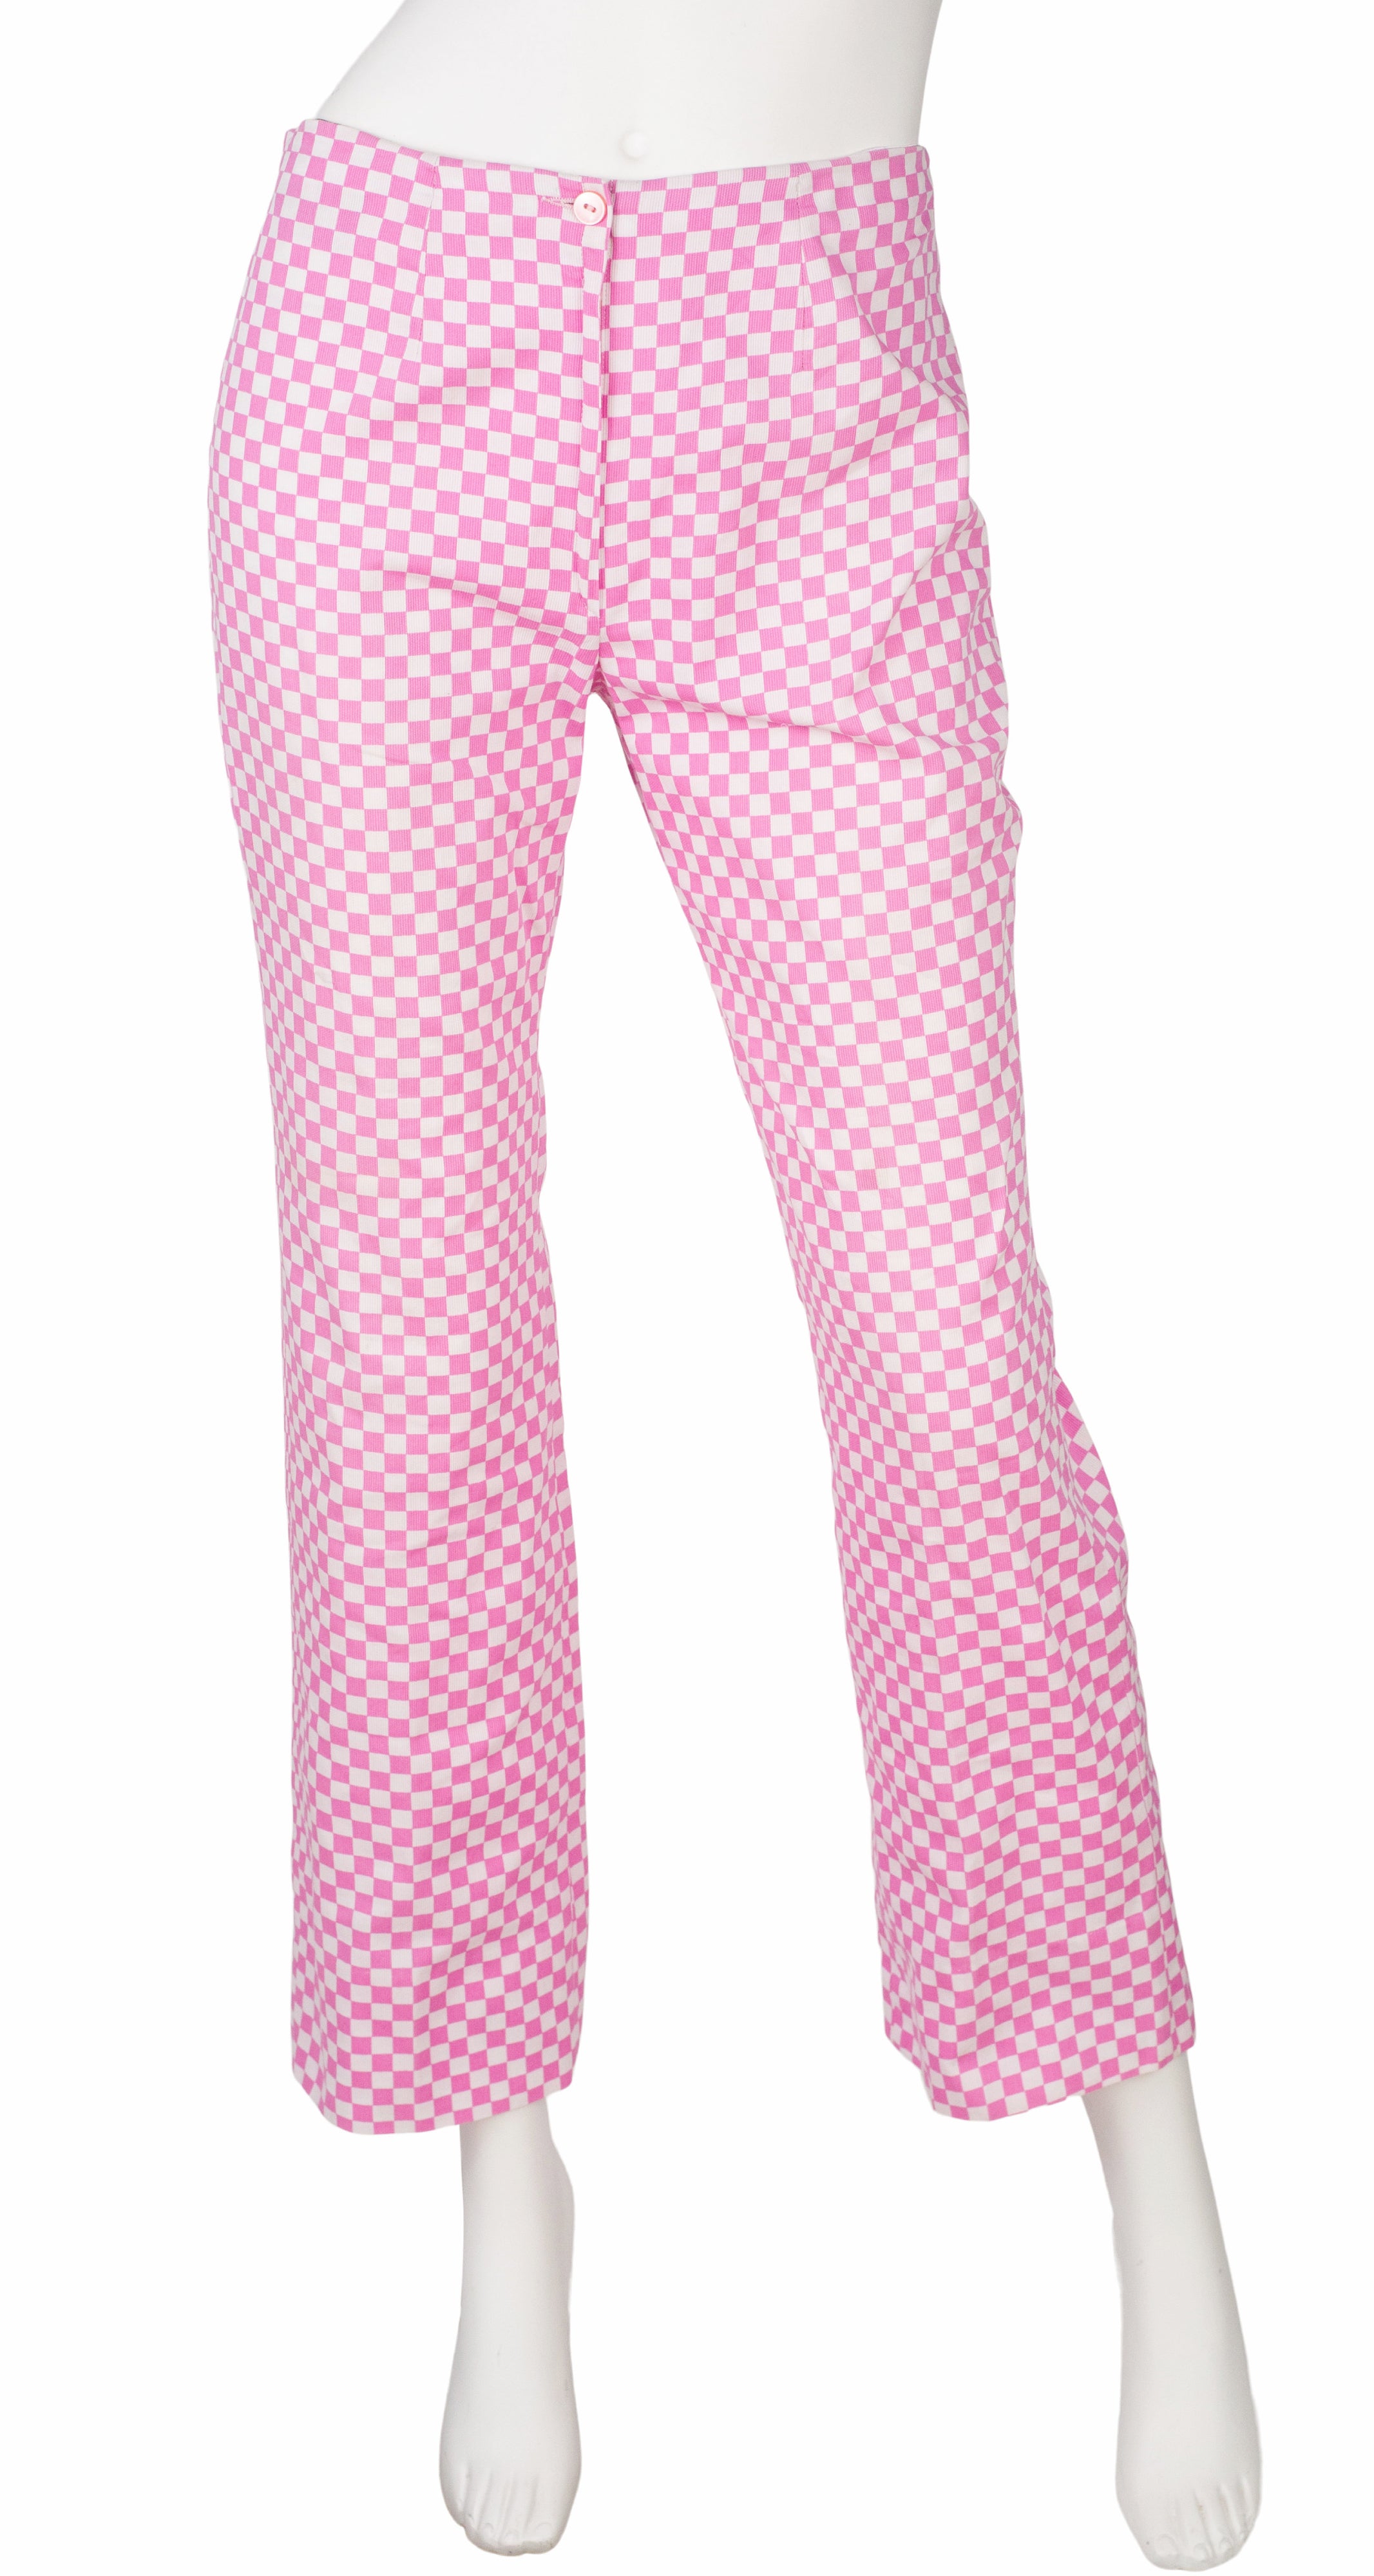 1960s Mod Pink & White Check Cotton Trousers